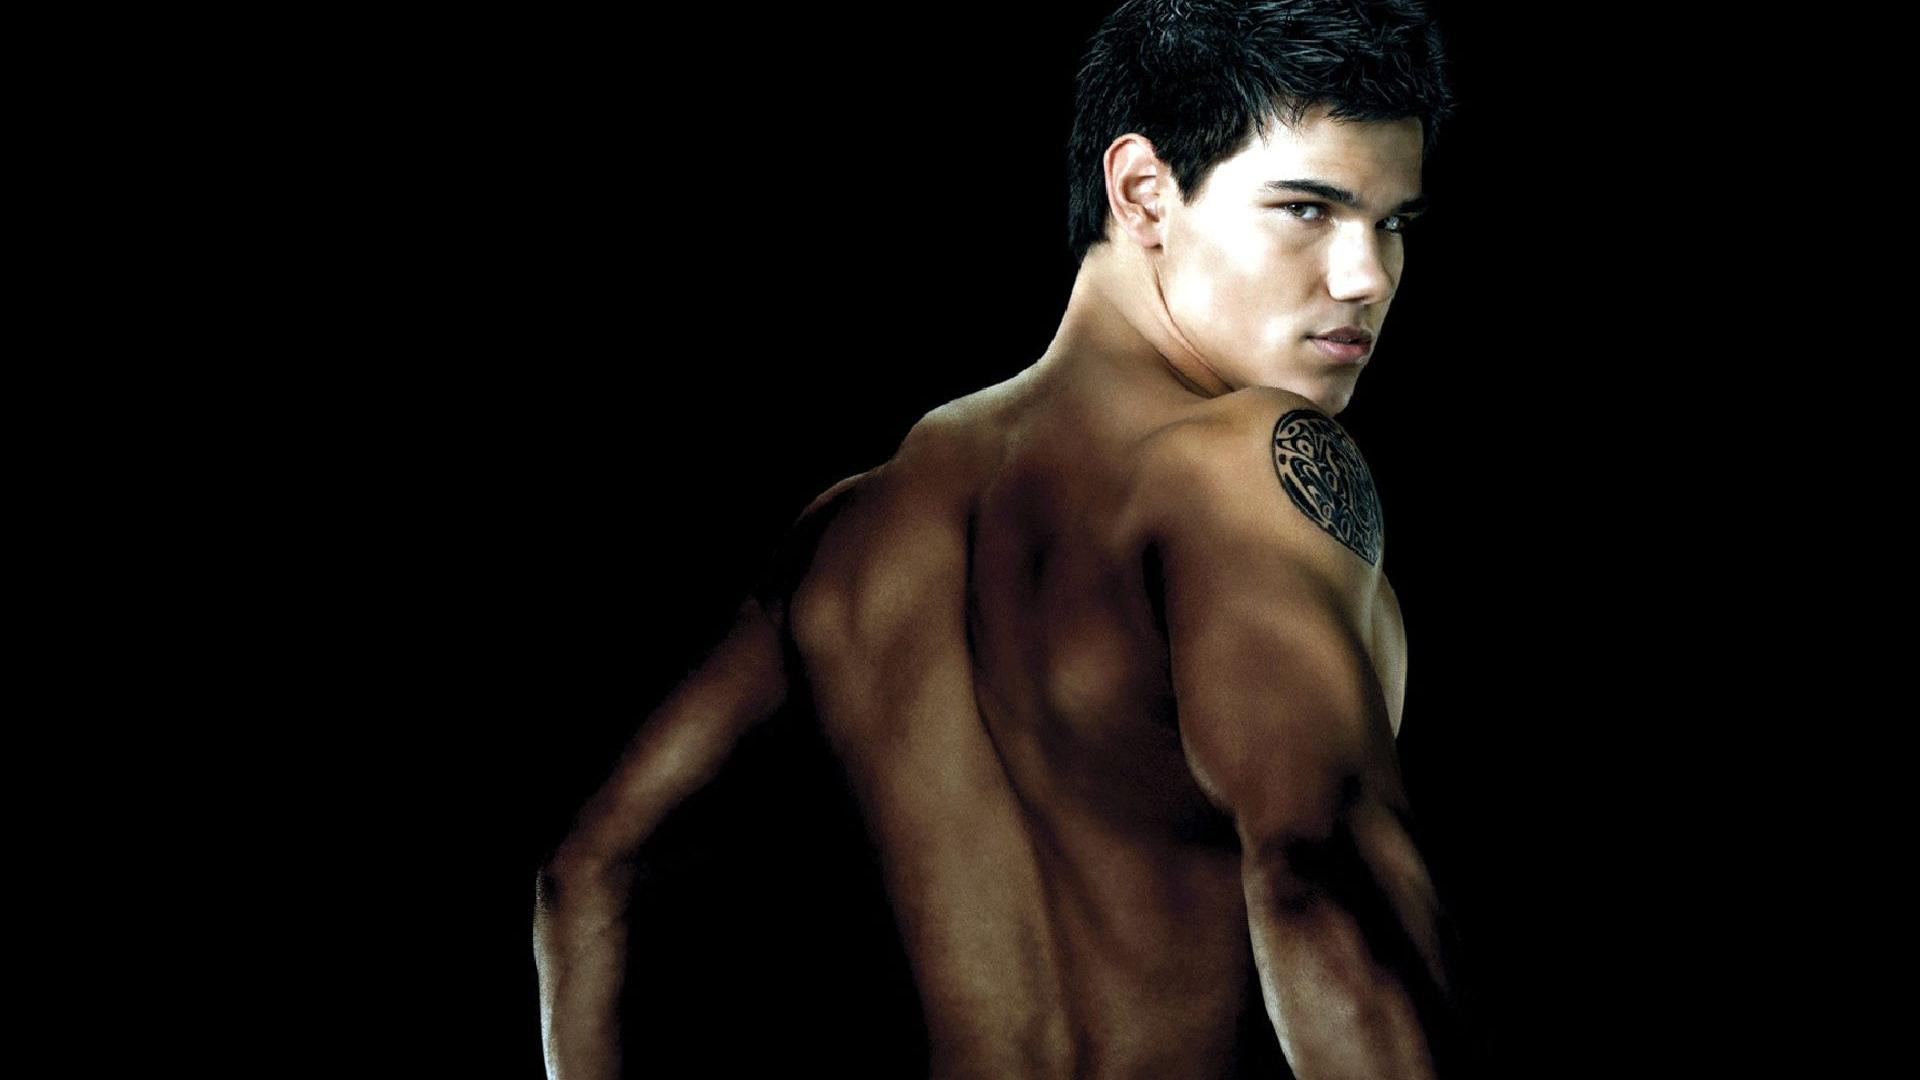 Taylor Lautner Shirtless Wallpaper Background Pictures